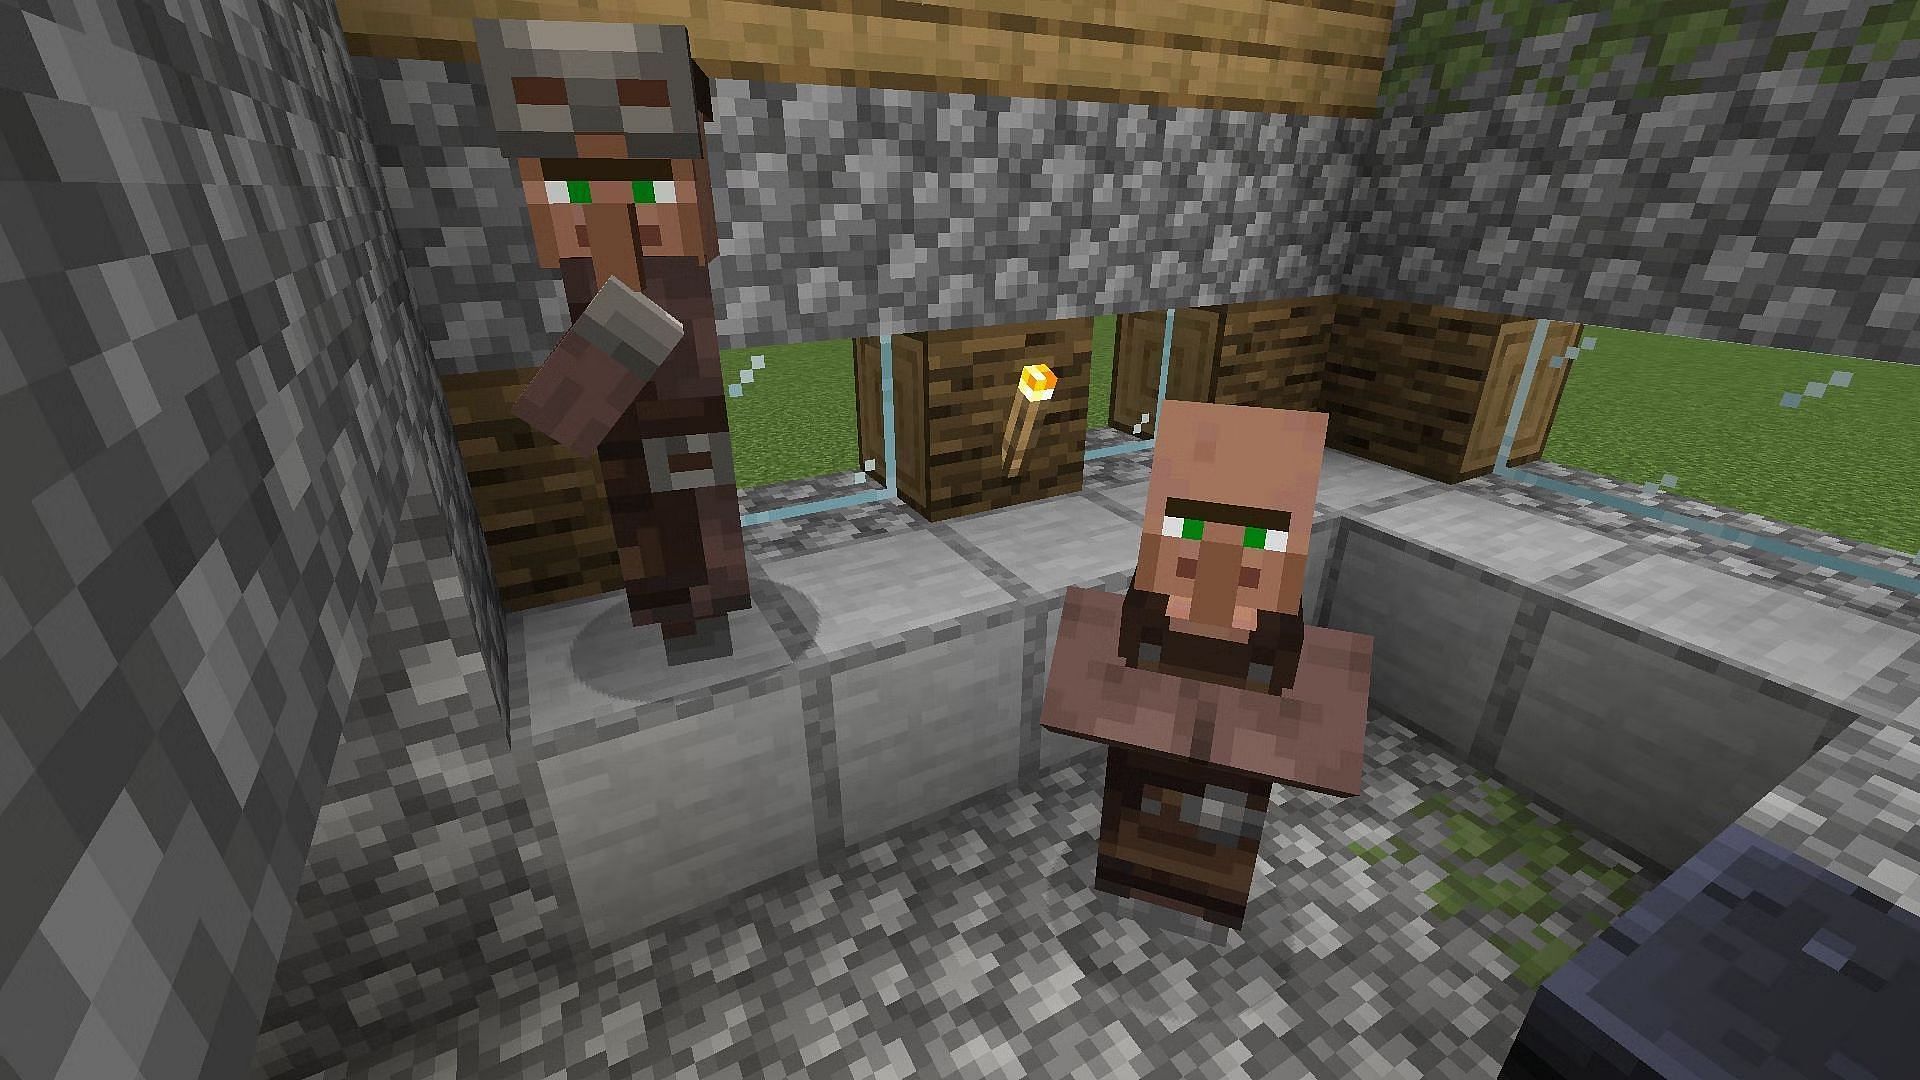 Place workstation blocks to assign a job to a villager (Image via Mojang)